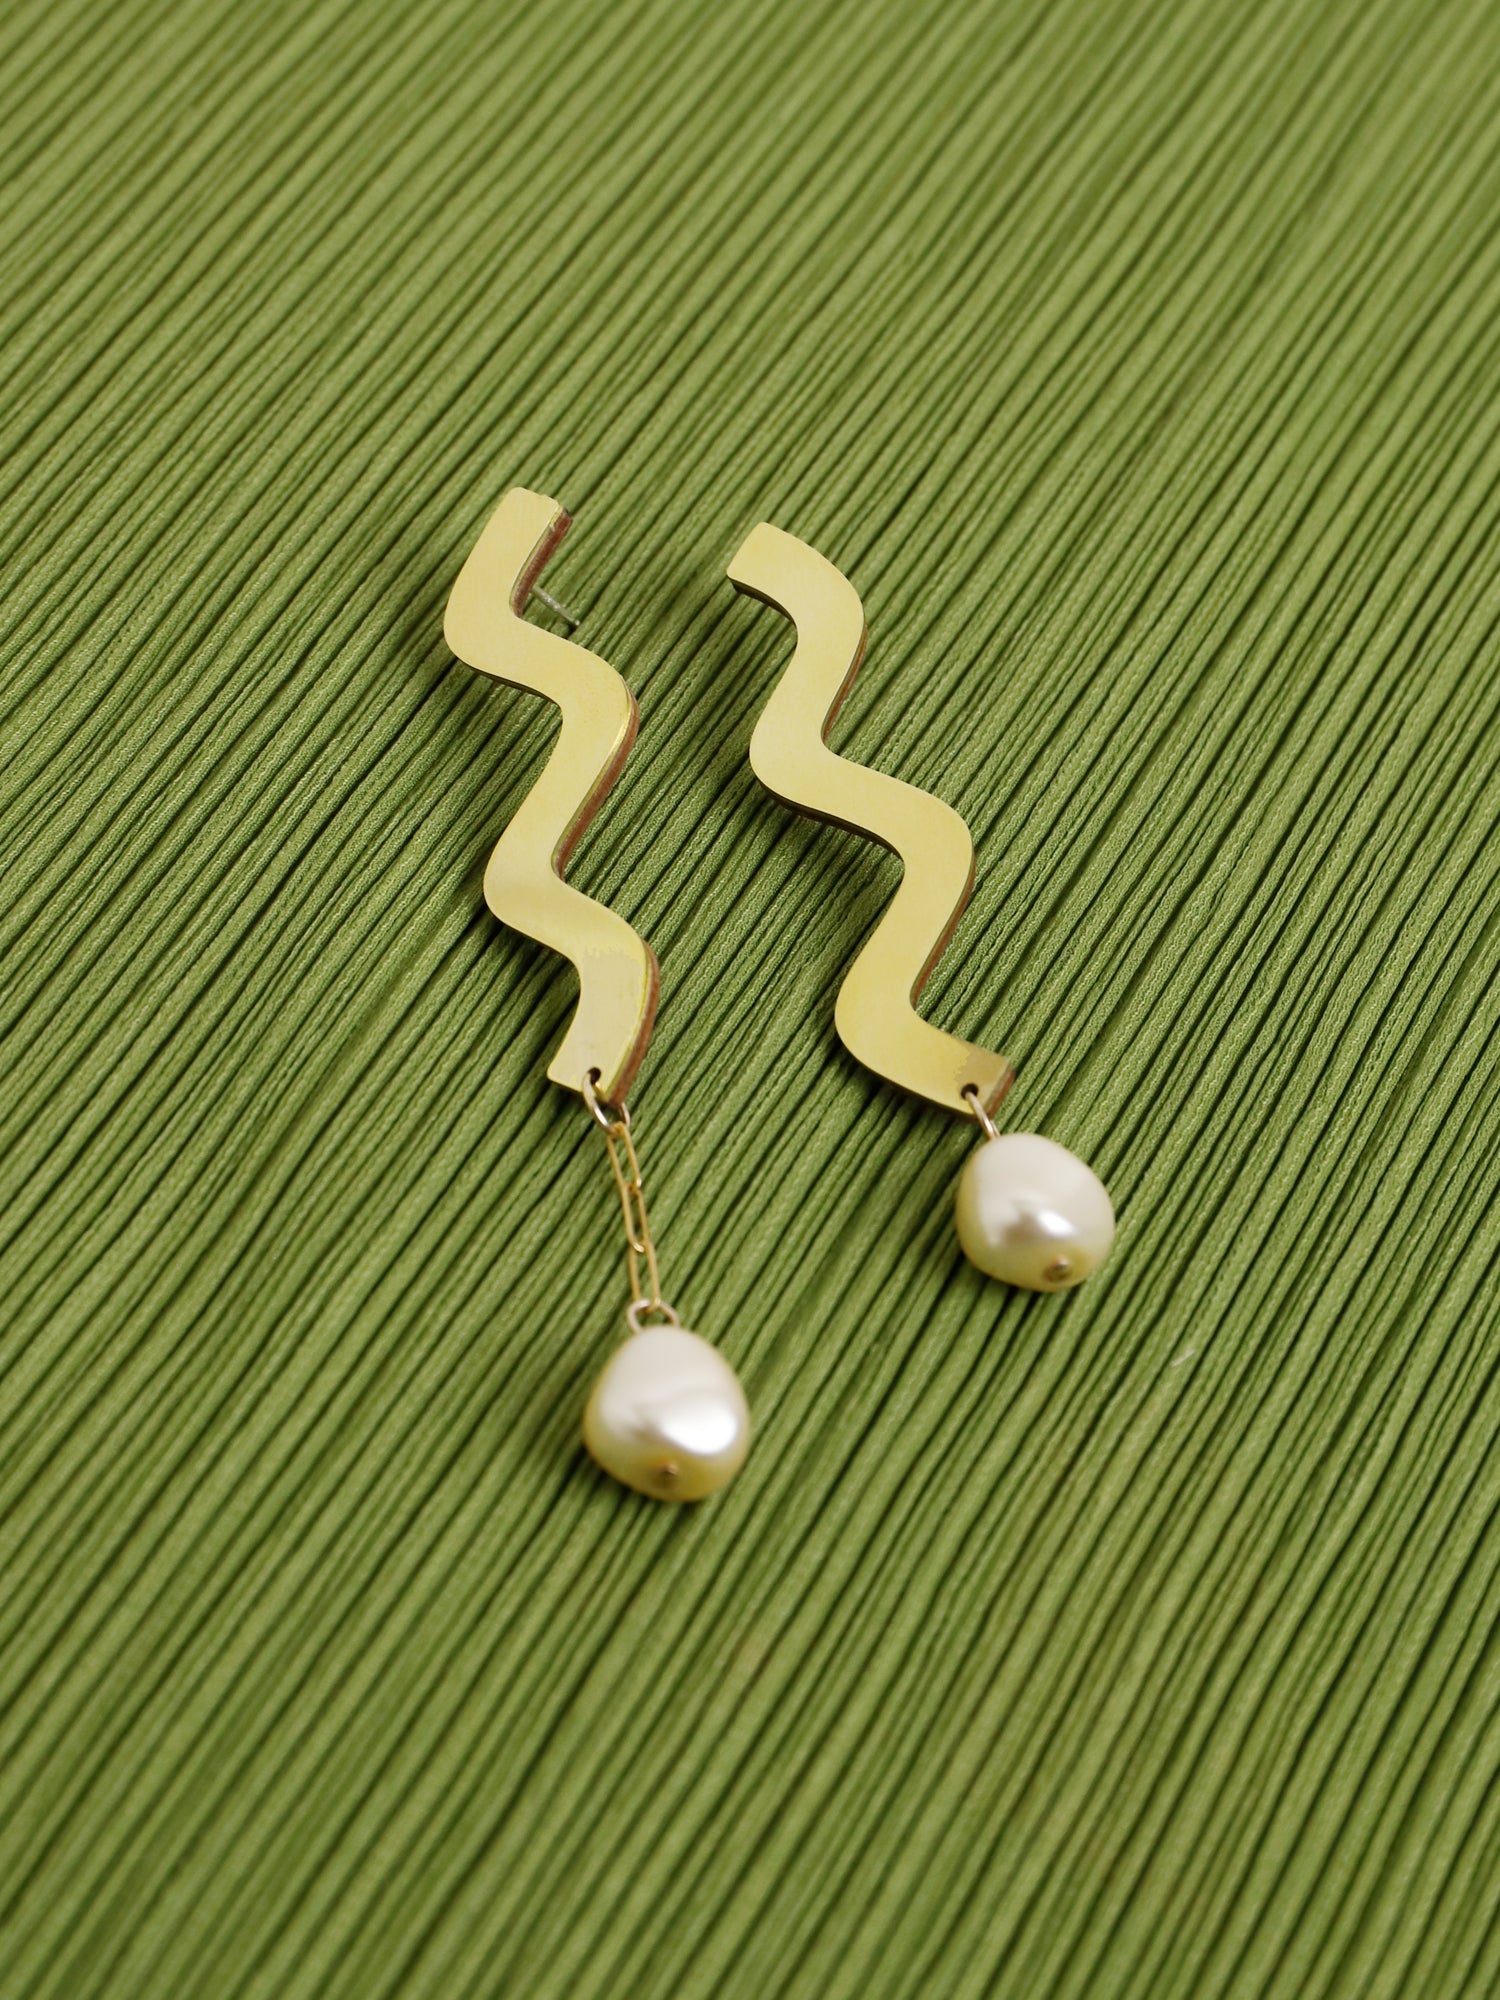 Martha Earrings in Brass. Wavy asymmetric statement earrings made in brass with our signature wood base, Czech glass baroque pearls, 14k gold-filled chain and sterling silver earring posts. Made in the UK by Wolf & Moon.